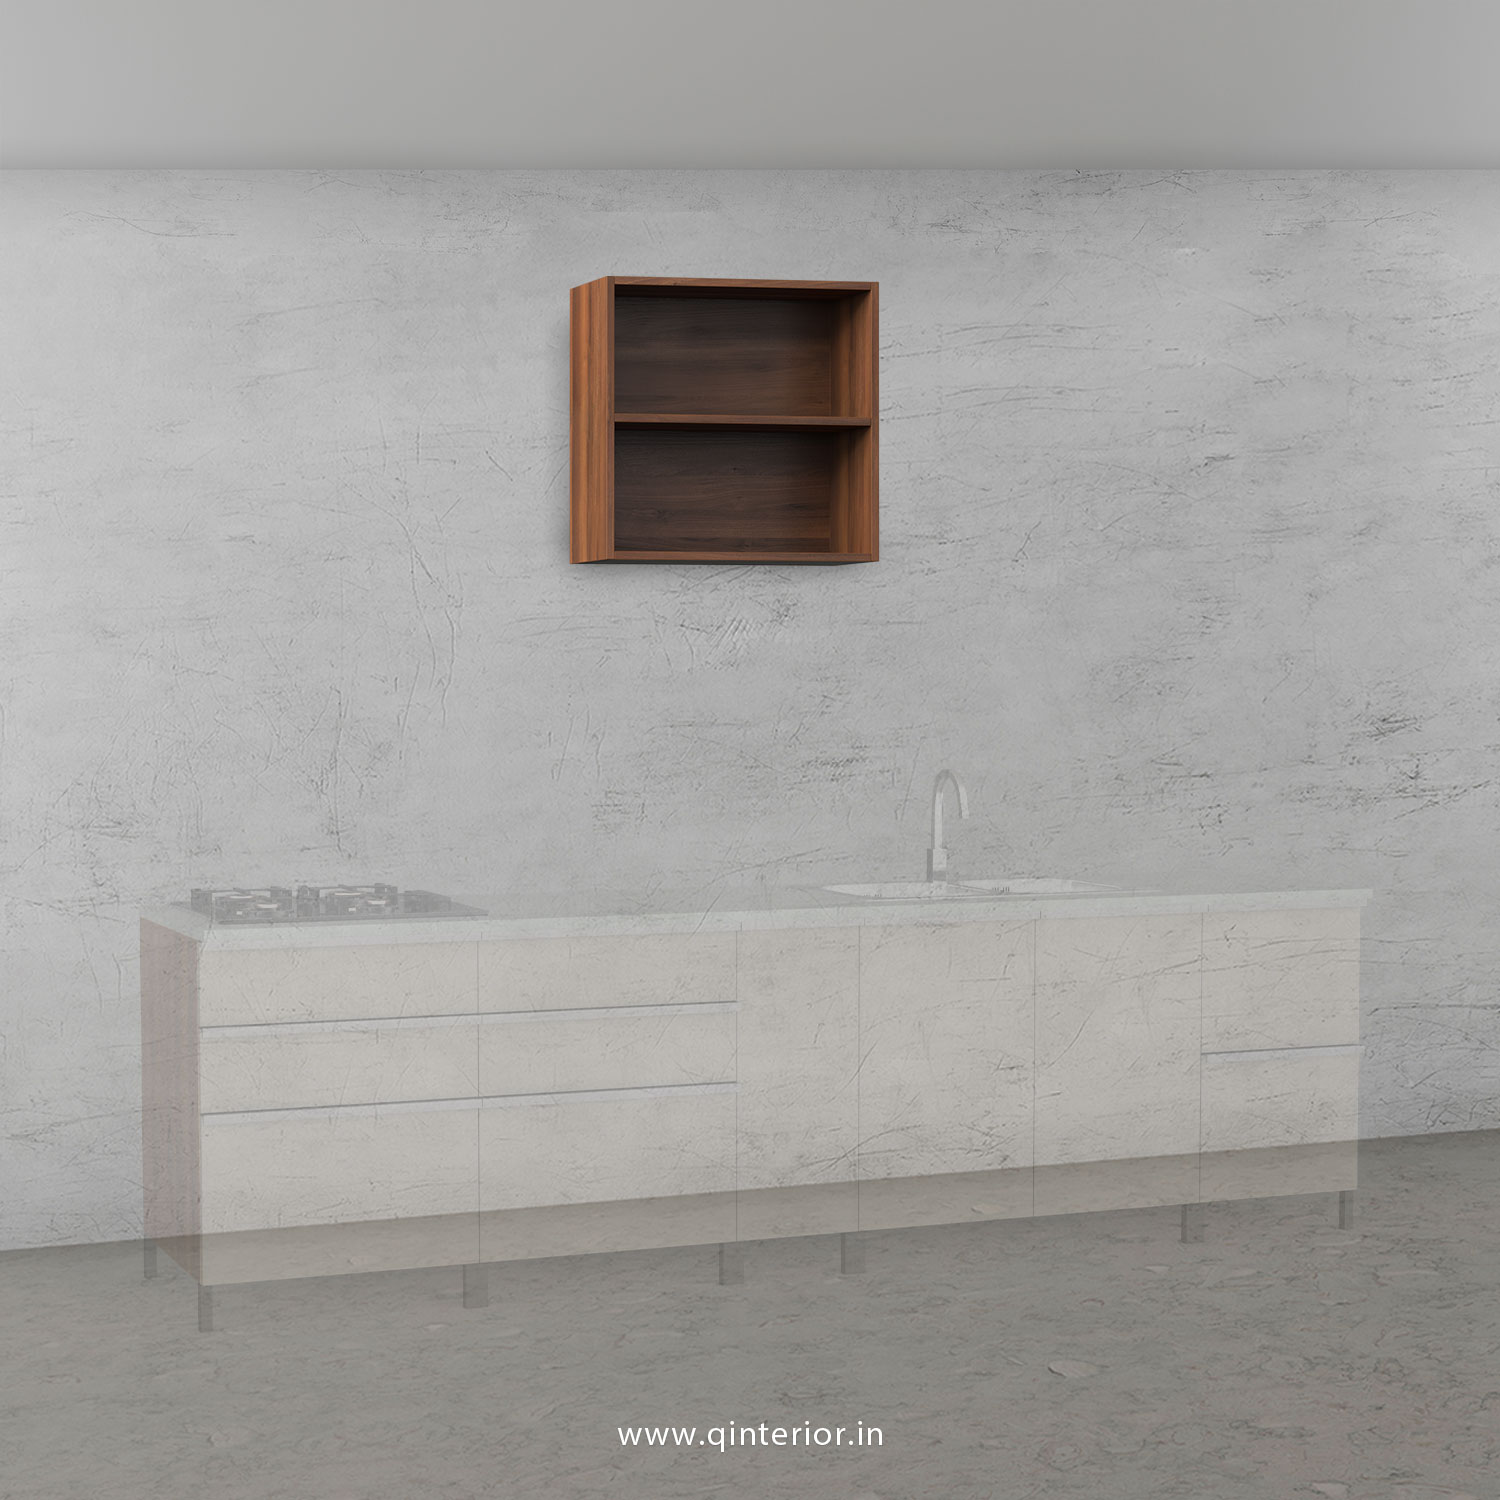 Stable Kitchen Wall Cabinet In Teak Finish Kwc003 By Q Interior